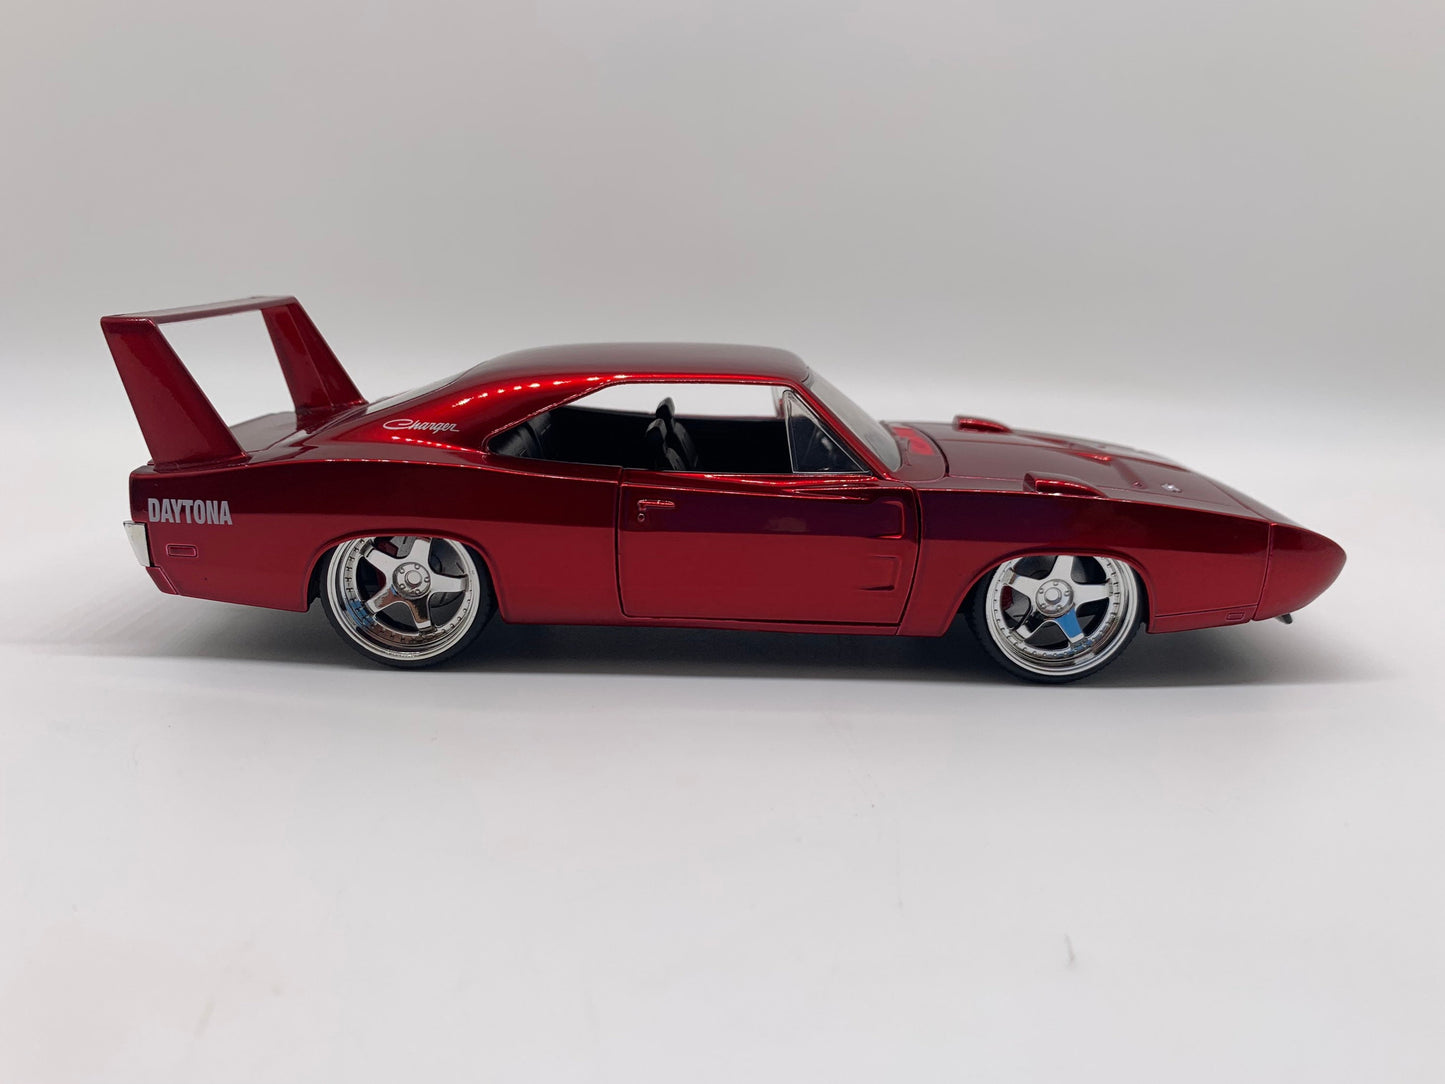 Jada 1969 Dodge Charger Daytona Dark Red Collectible 1:24 Scale Model Diecast Toy Car